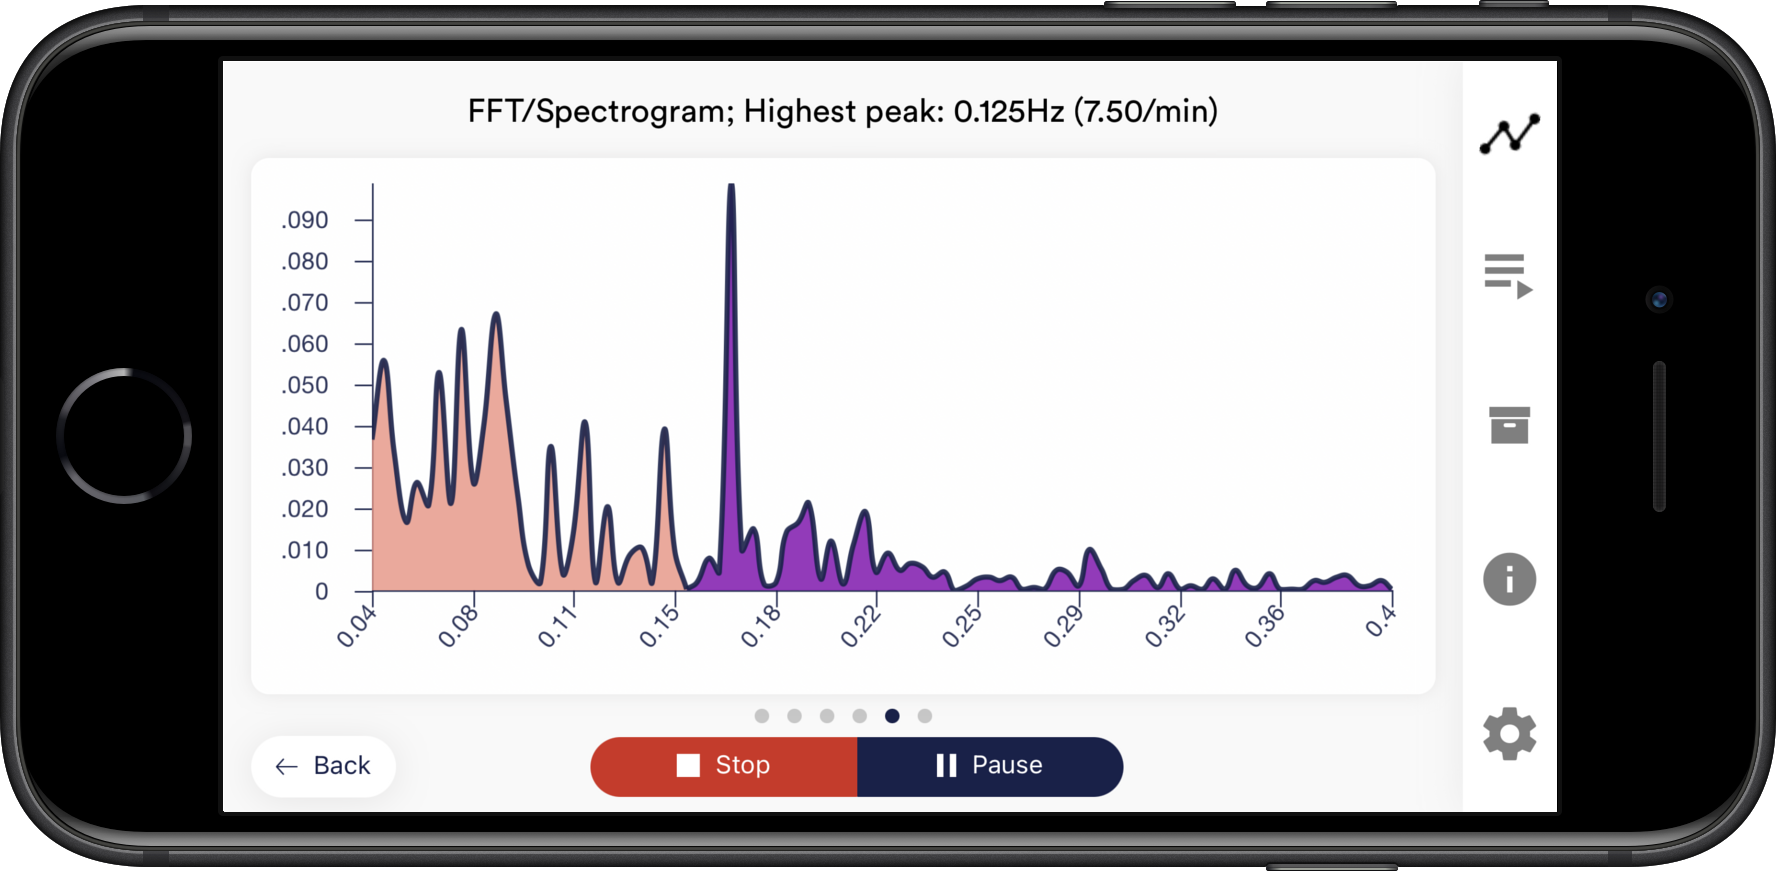 hrv biofeedback trainnings at home - result overview on an iPhone landscape screenshot